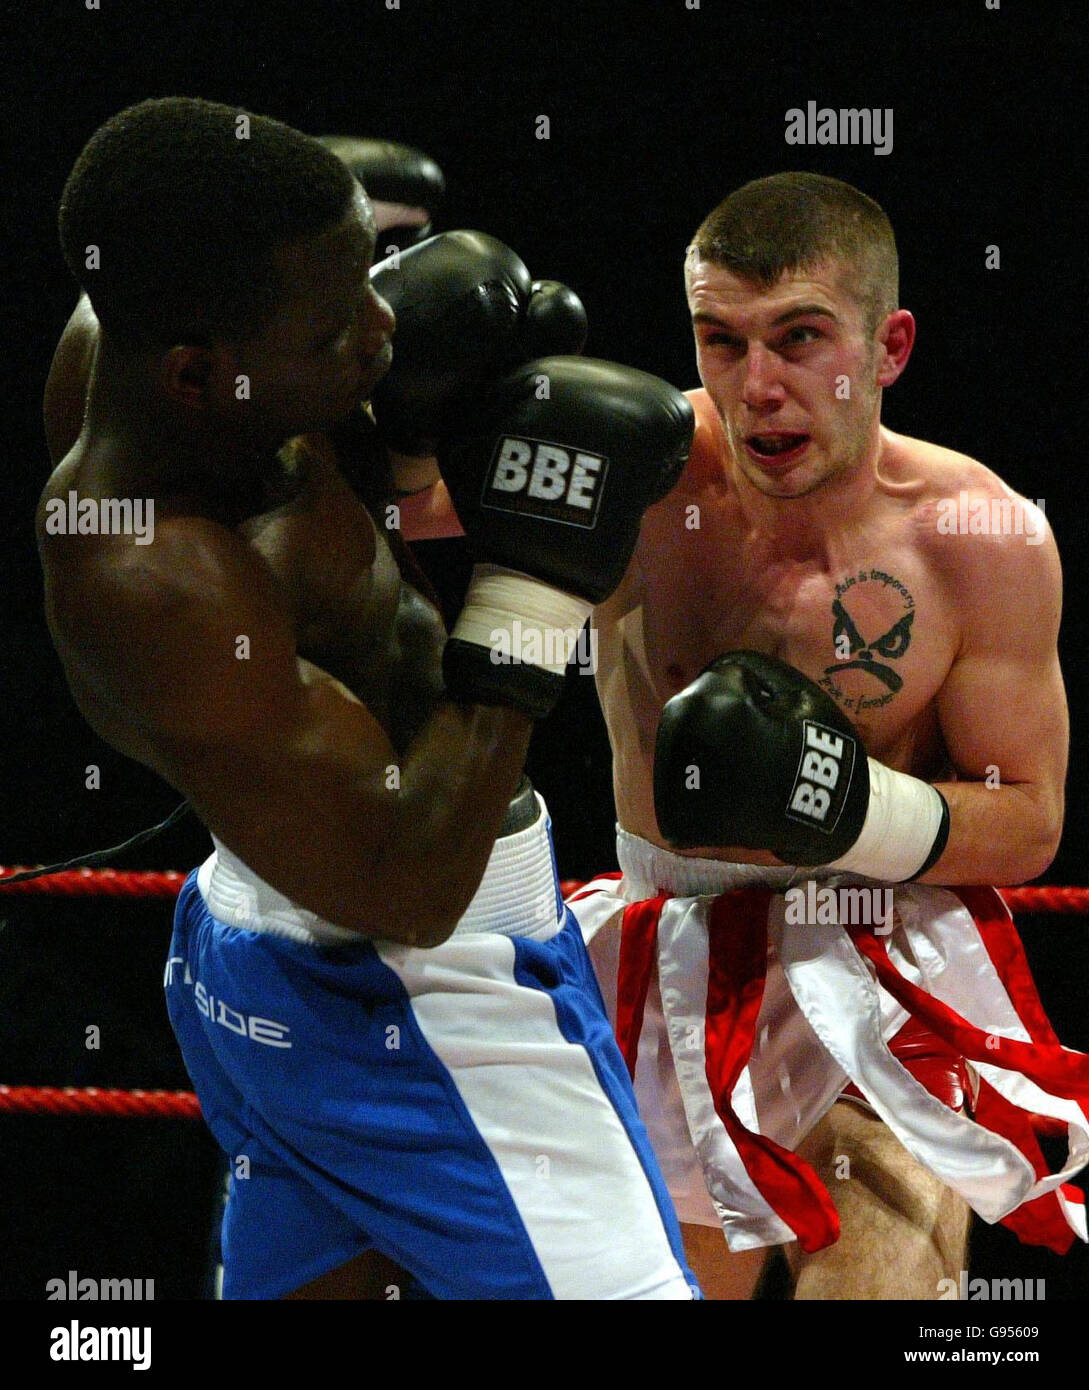 Aberdeen's Lee McAllistair (right) holds off London's Silence Shaheed during their lightweight contest at the Meadowbank stadium in Edinburgh, Saturday February 18, 2006. PRESS ASSOCIATION Photo. Photo credit should read: David Cheskin/PA. Stock Photo